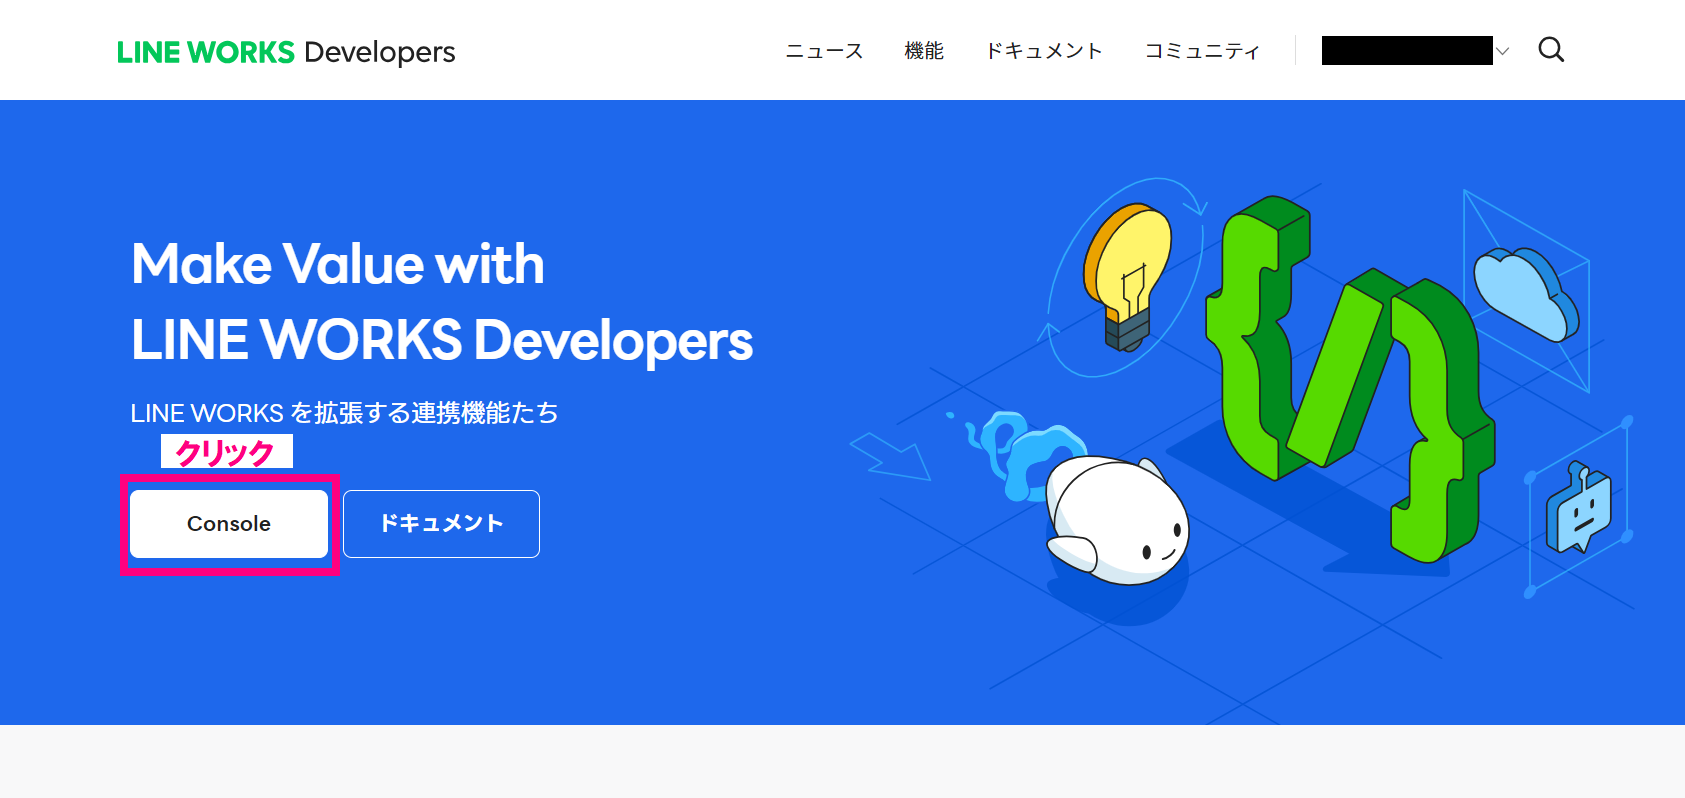 step5_LINE WORKS Developers Consoleクリック.png